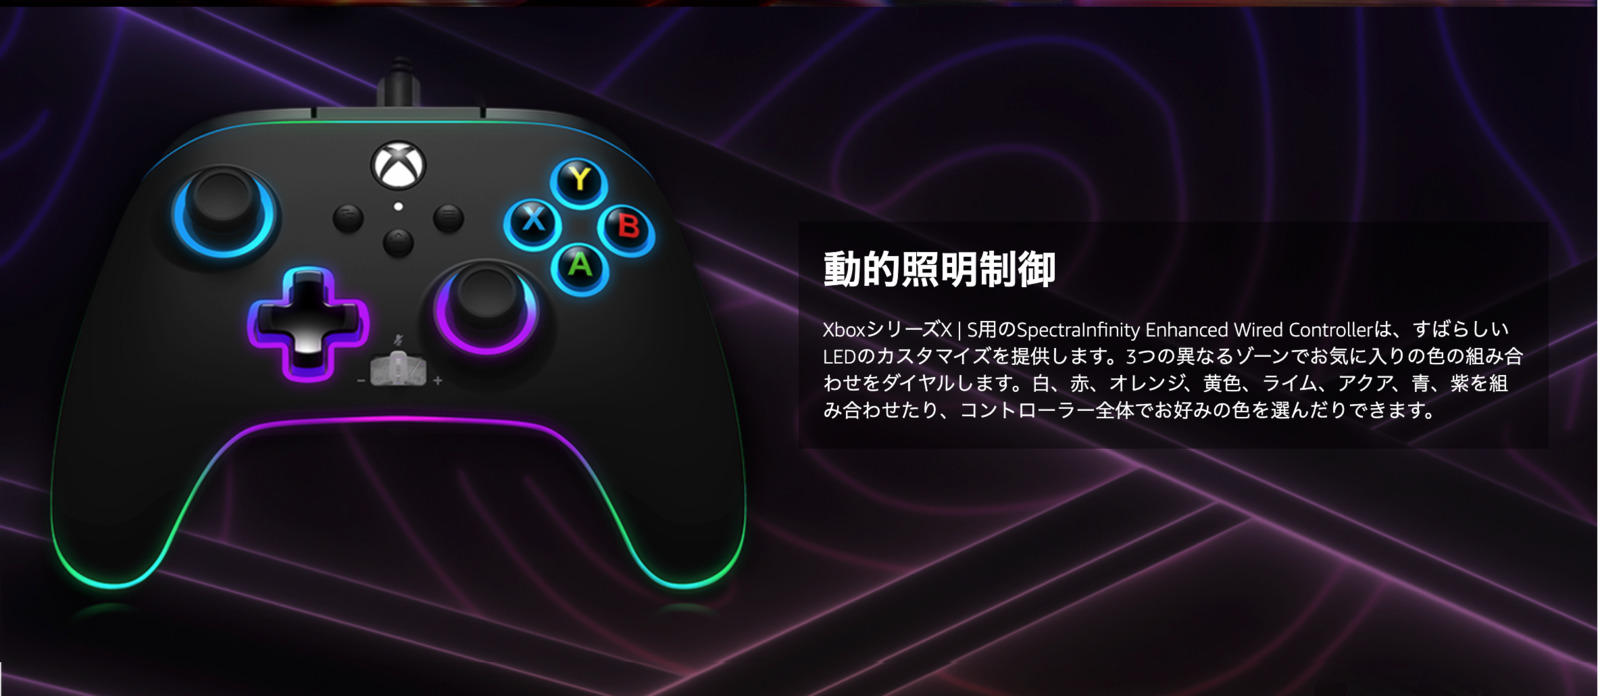 xbox コントローラー パワーエー XBOX SERIES X|S XBOX ONE PowerA Spectra  Infinity Enhanced Wired Controller for Xbox Series X|S, Xbox One [並行輸入品]  大日本空輸 